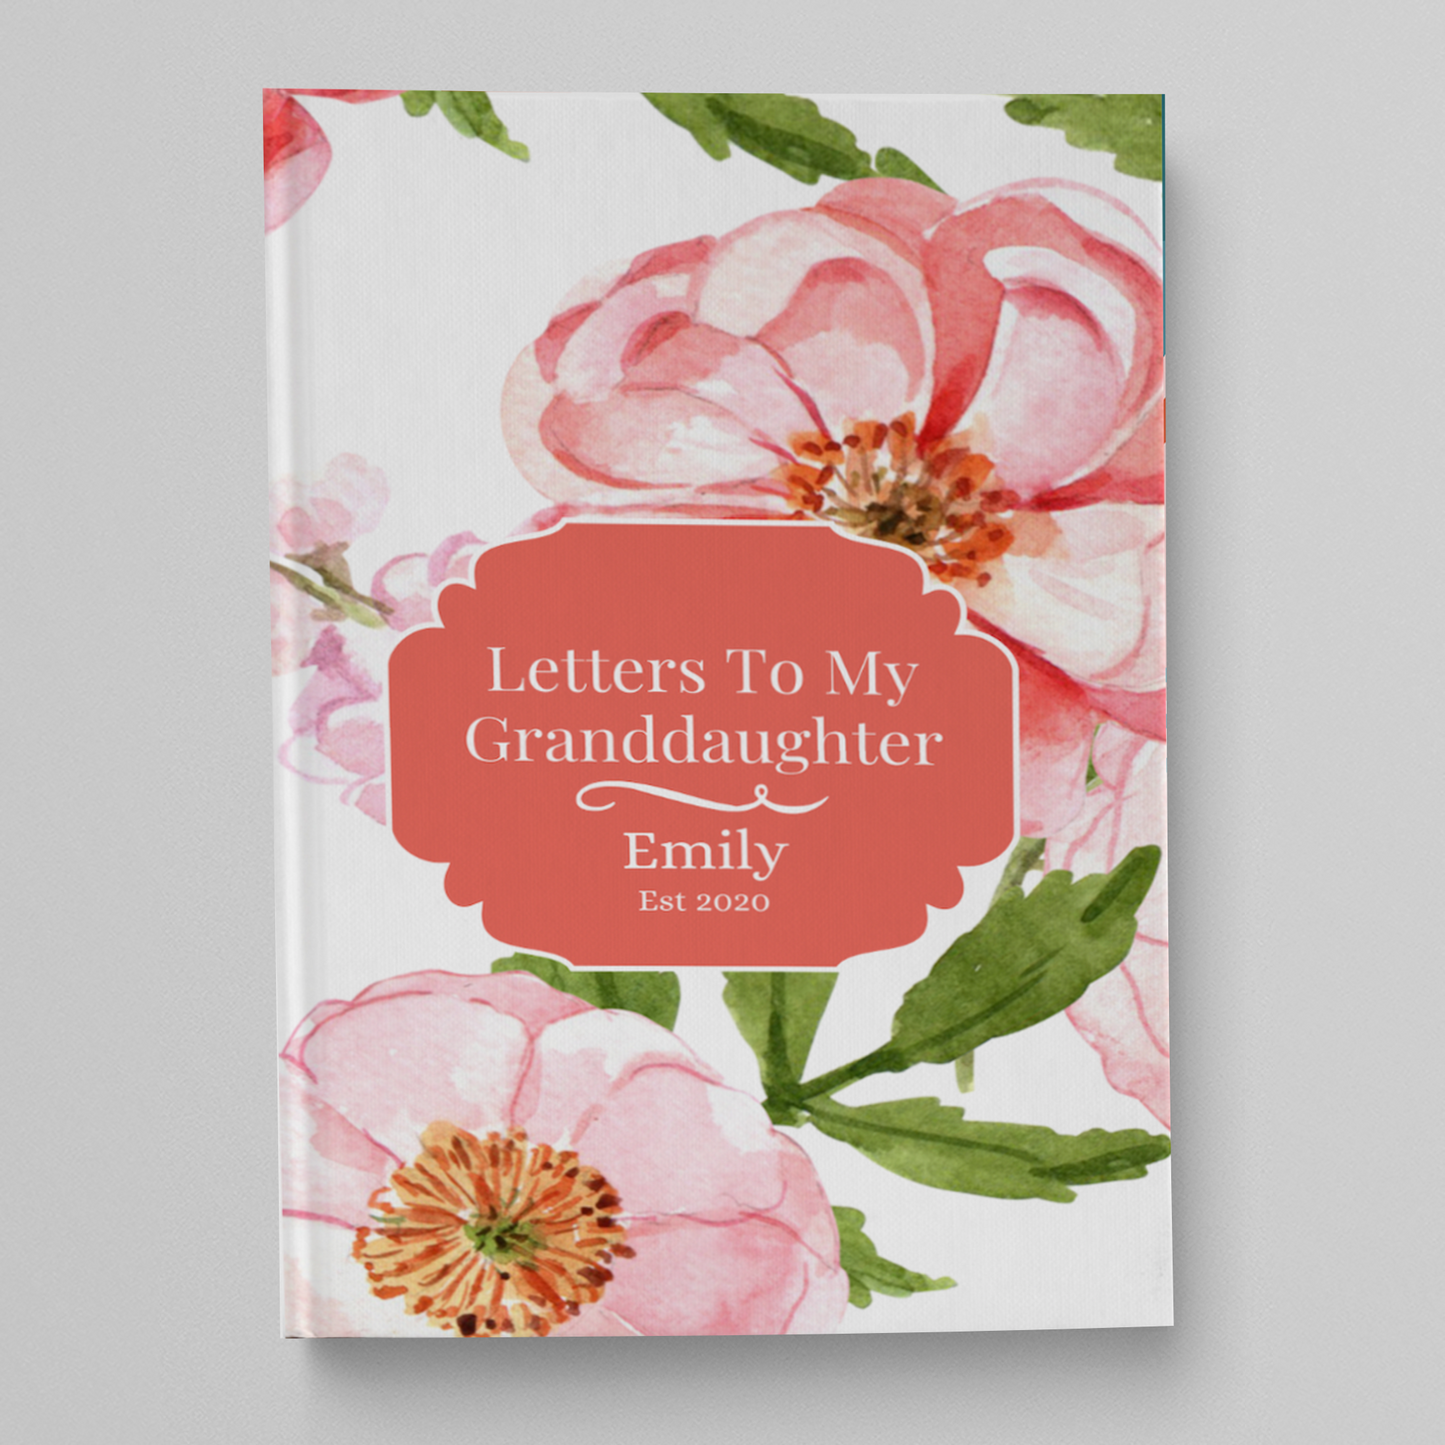 Letters To My Granddaughter Journal, Personalized Gift For Grandchild, Granddaughter Gift, First Time Grandma, Grandparent To Be Keepsake, Journal, Memory Book For Granddaughter - Luhvee Books